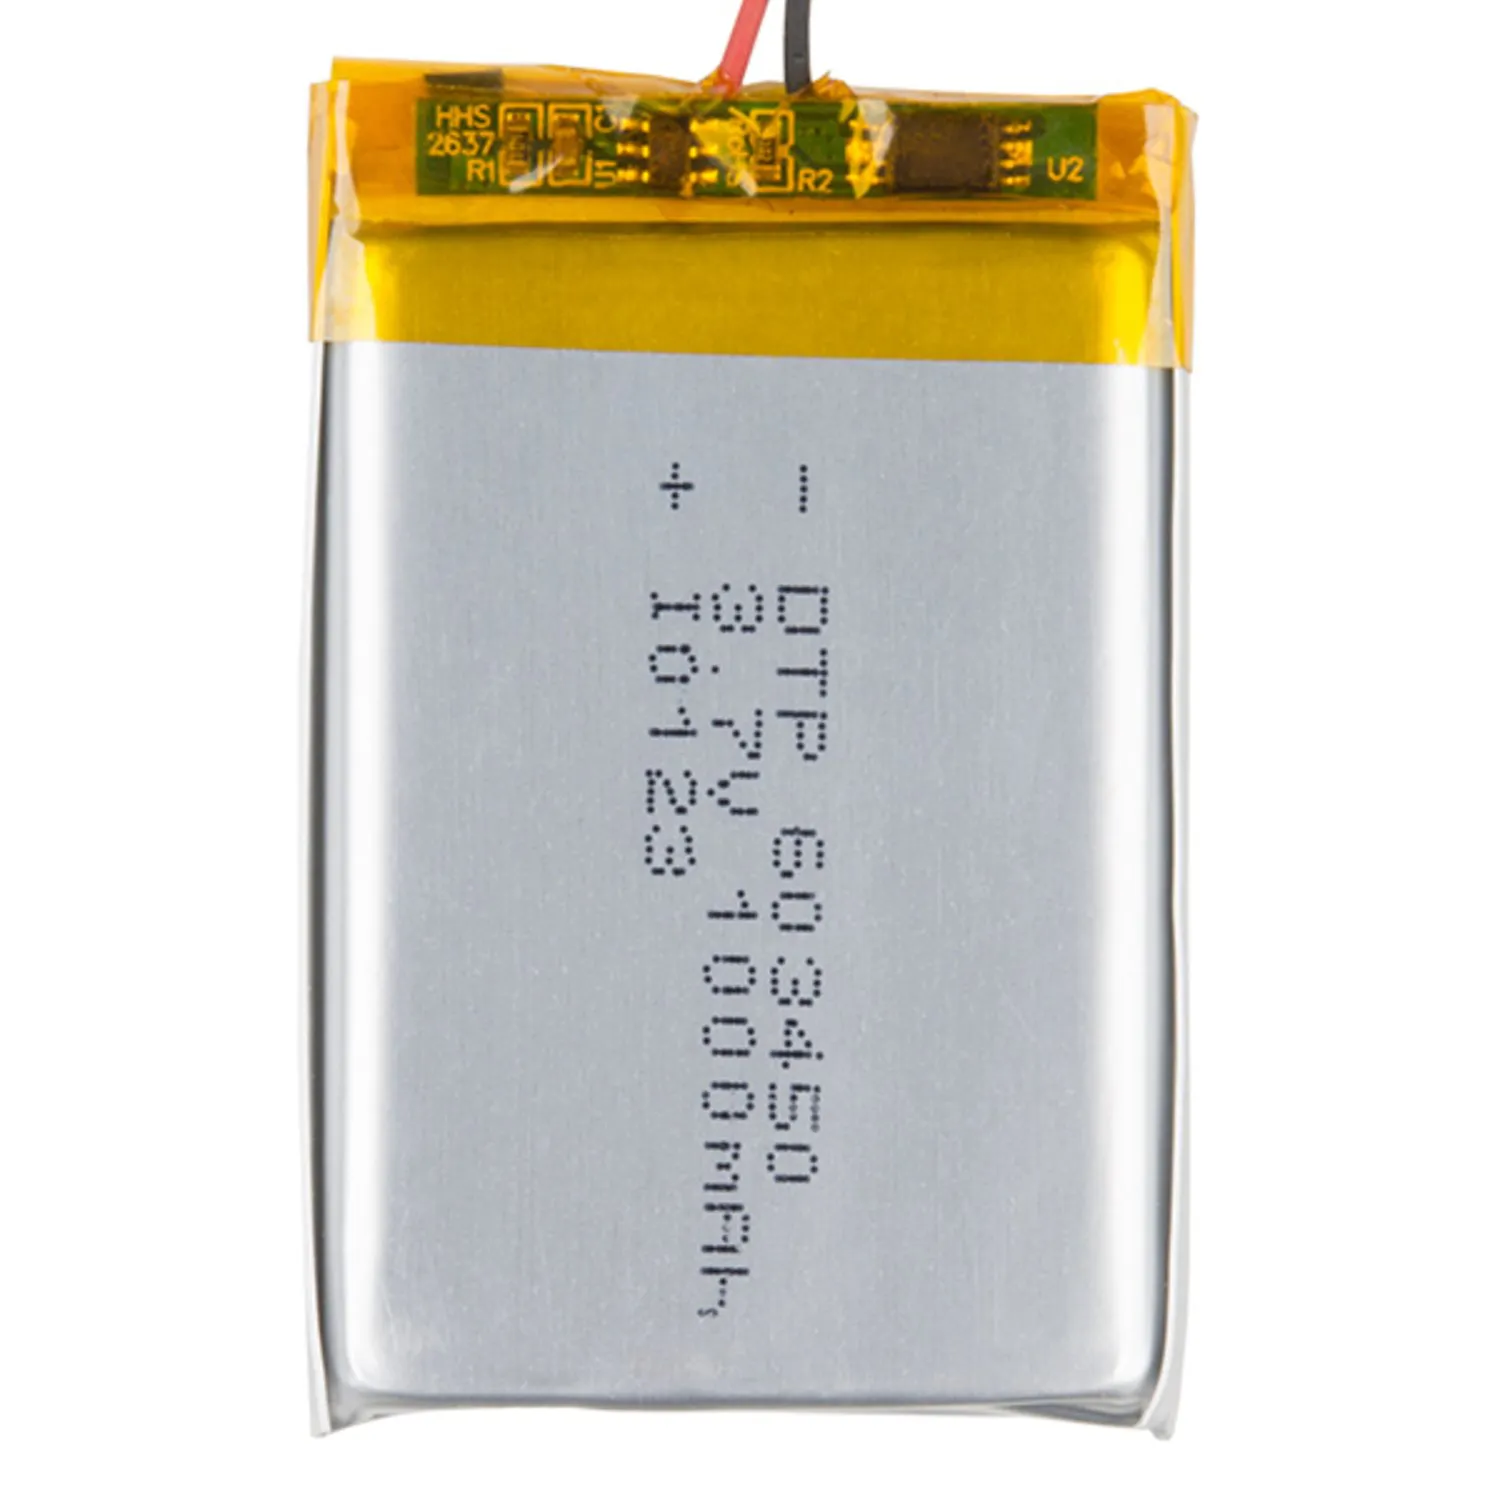 Photo of Lithium Ion Battery - 1Ah